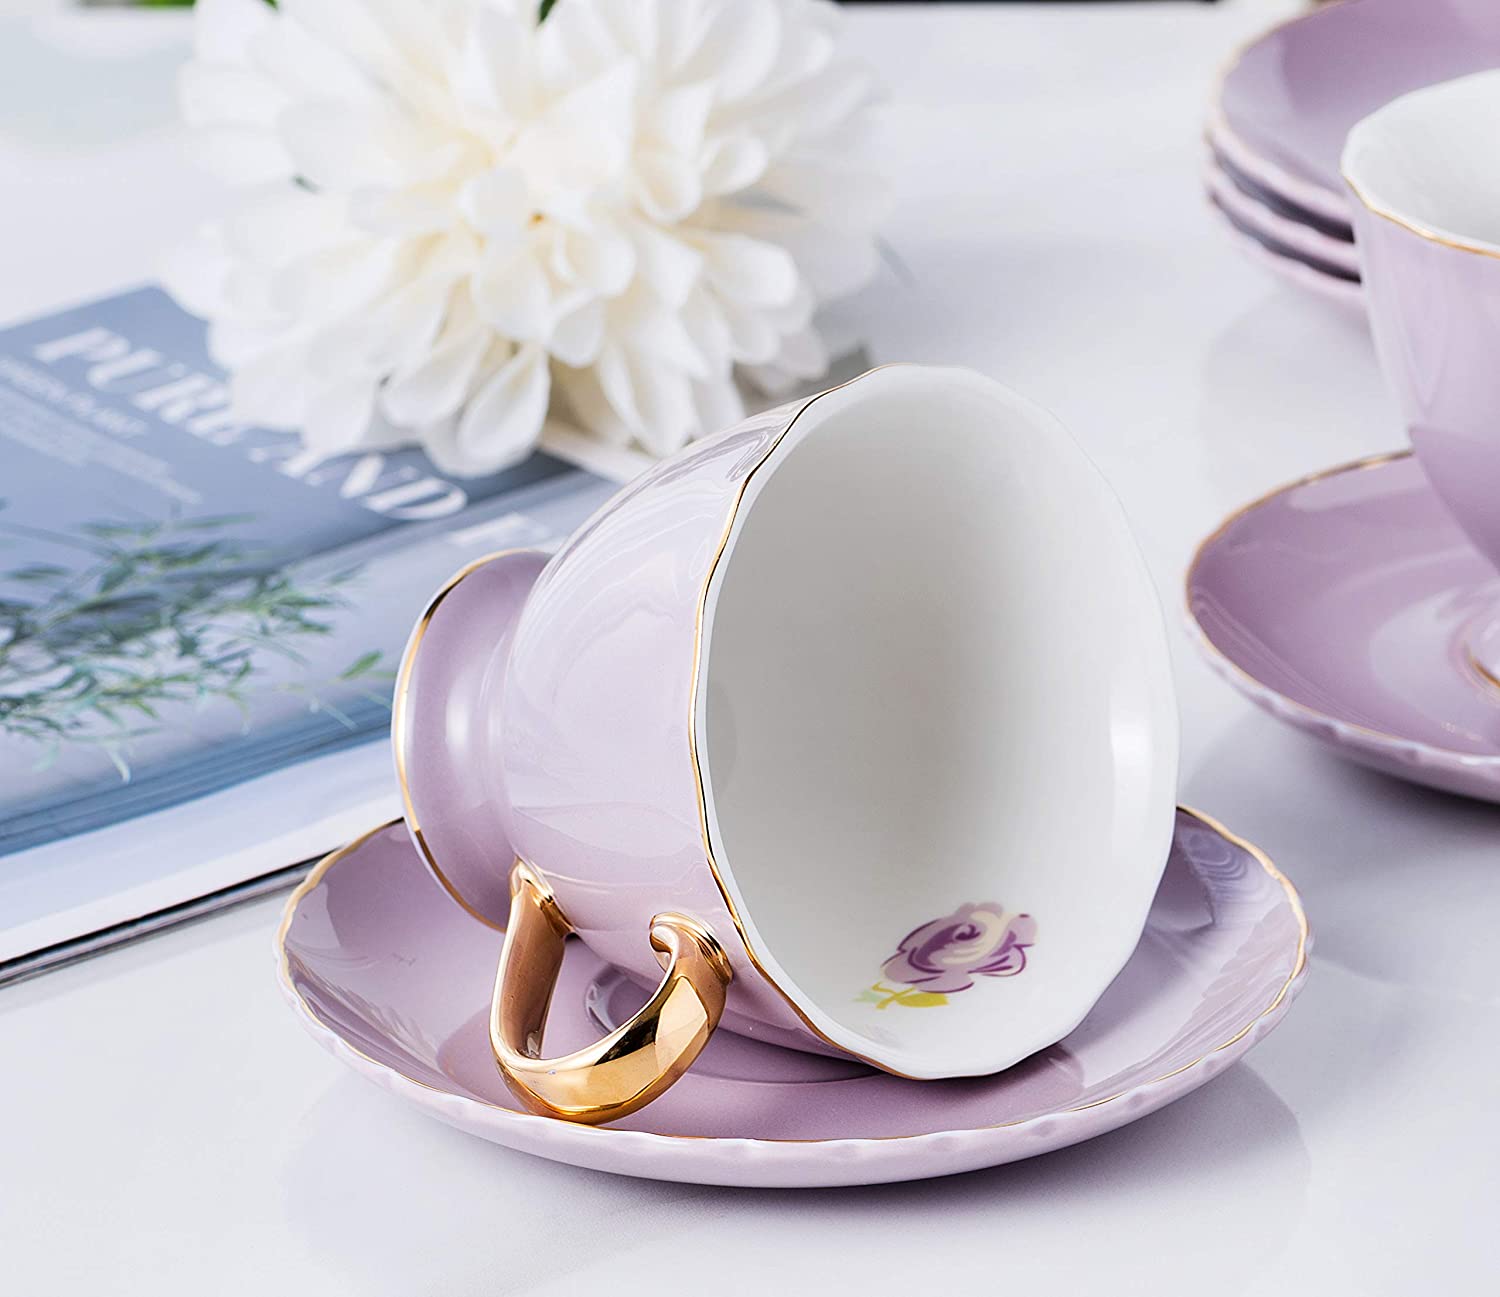 Jusalpha White China Tea Cup and Saucer Coffee Cup Set with Saucer and Spoon, of